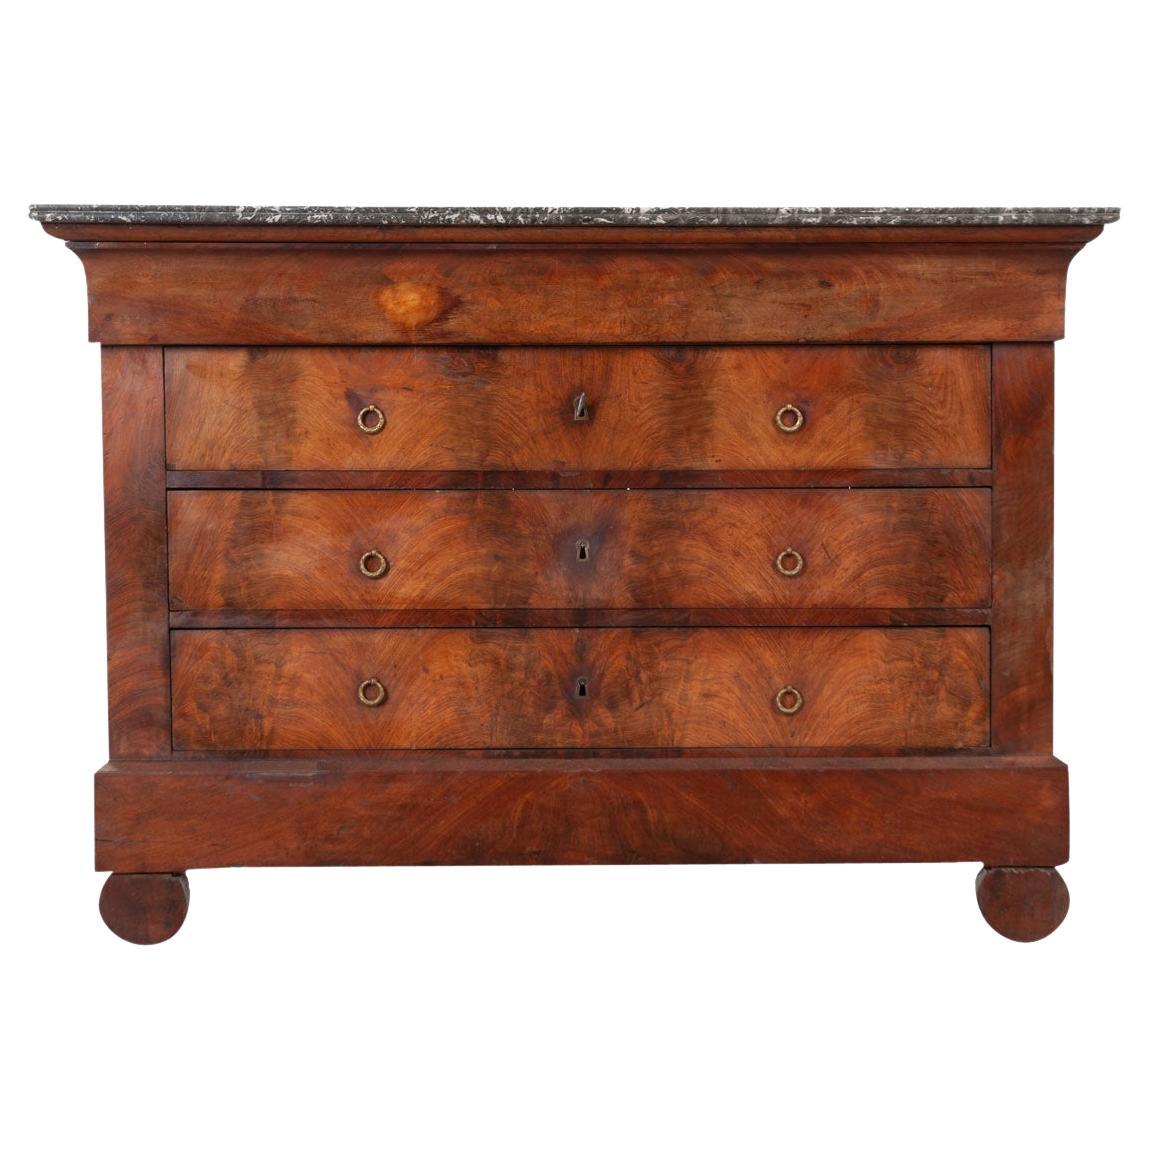 French Empire 19th Century Mahogany Commode For Sale